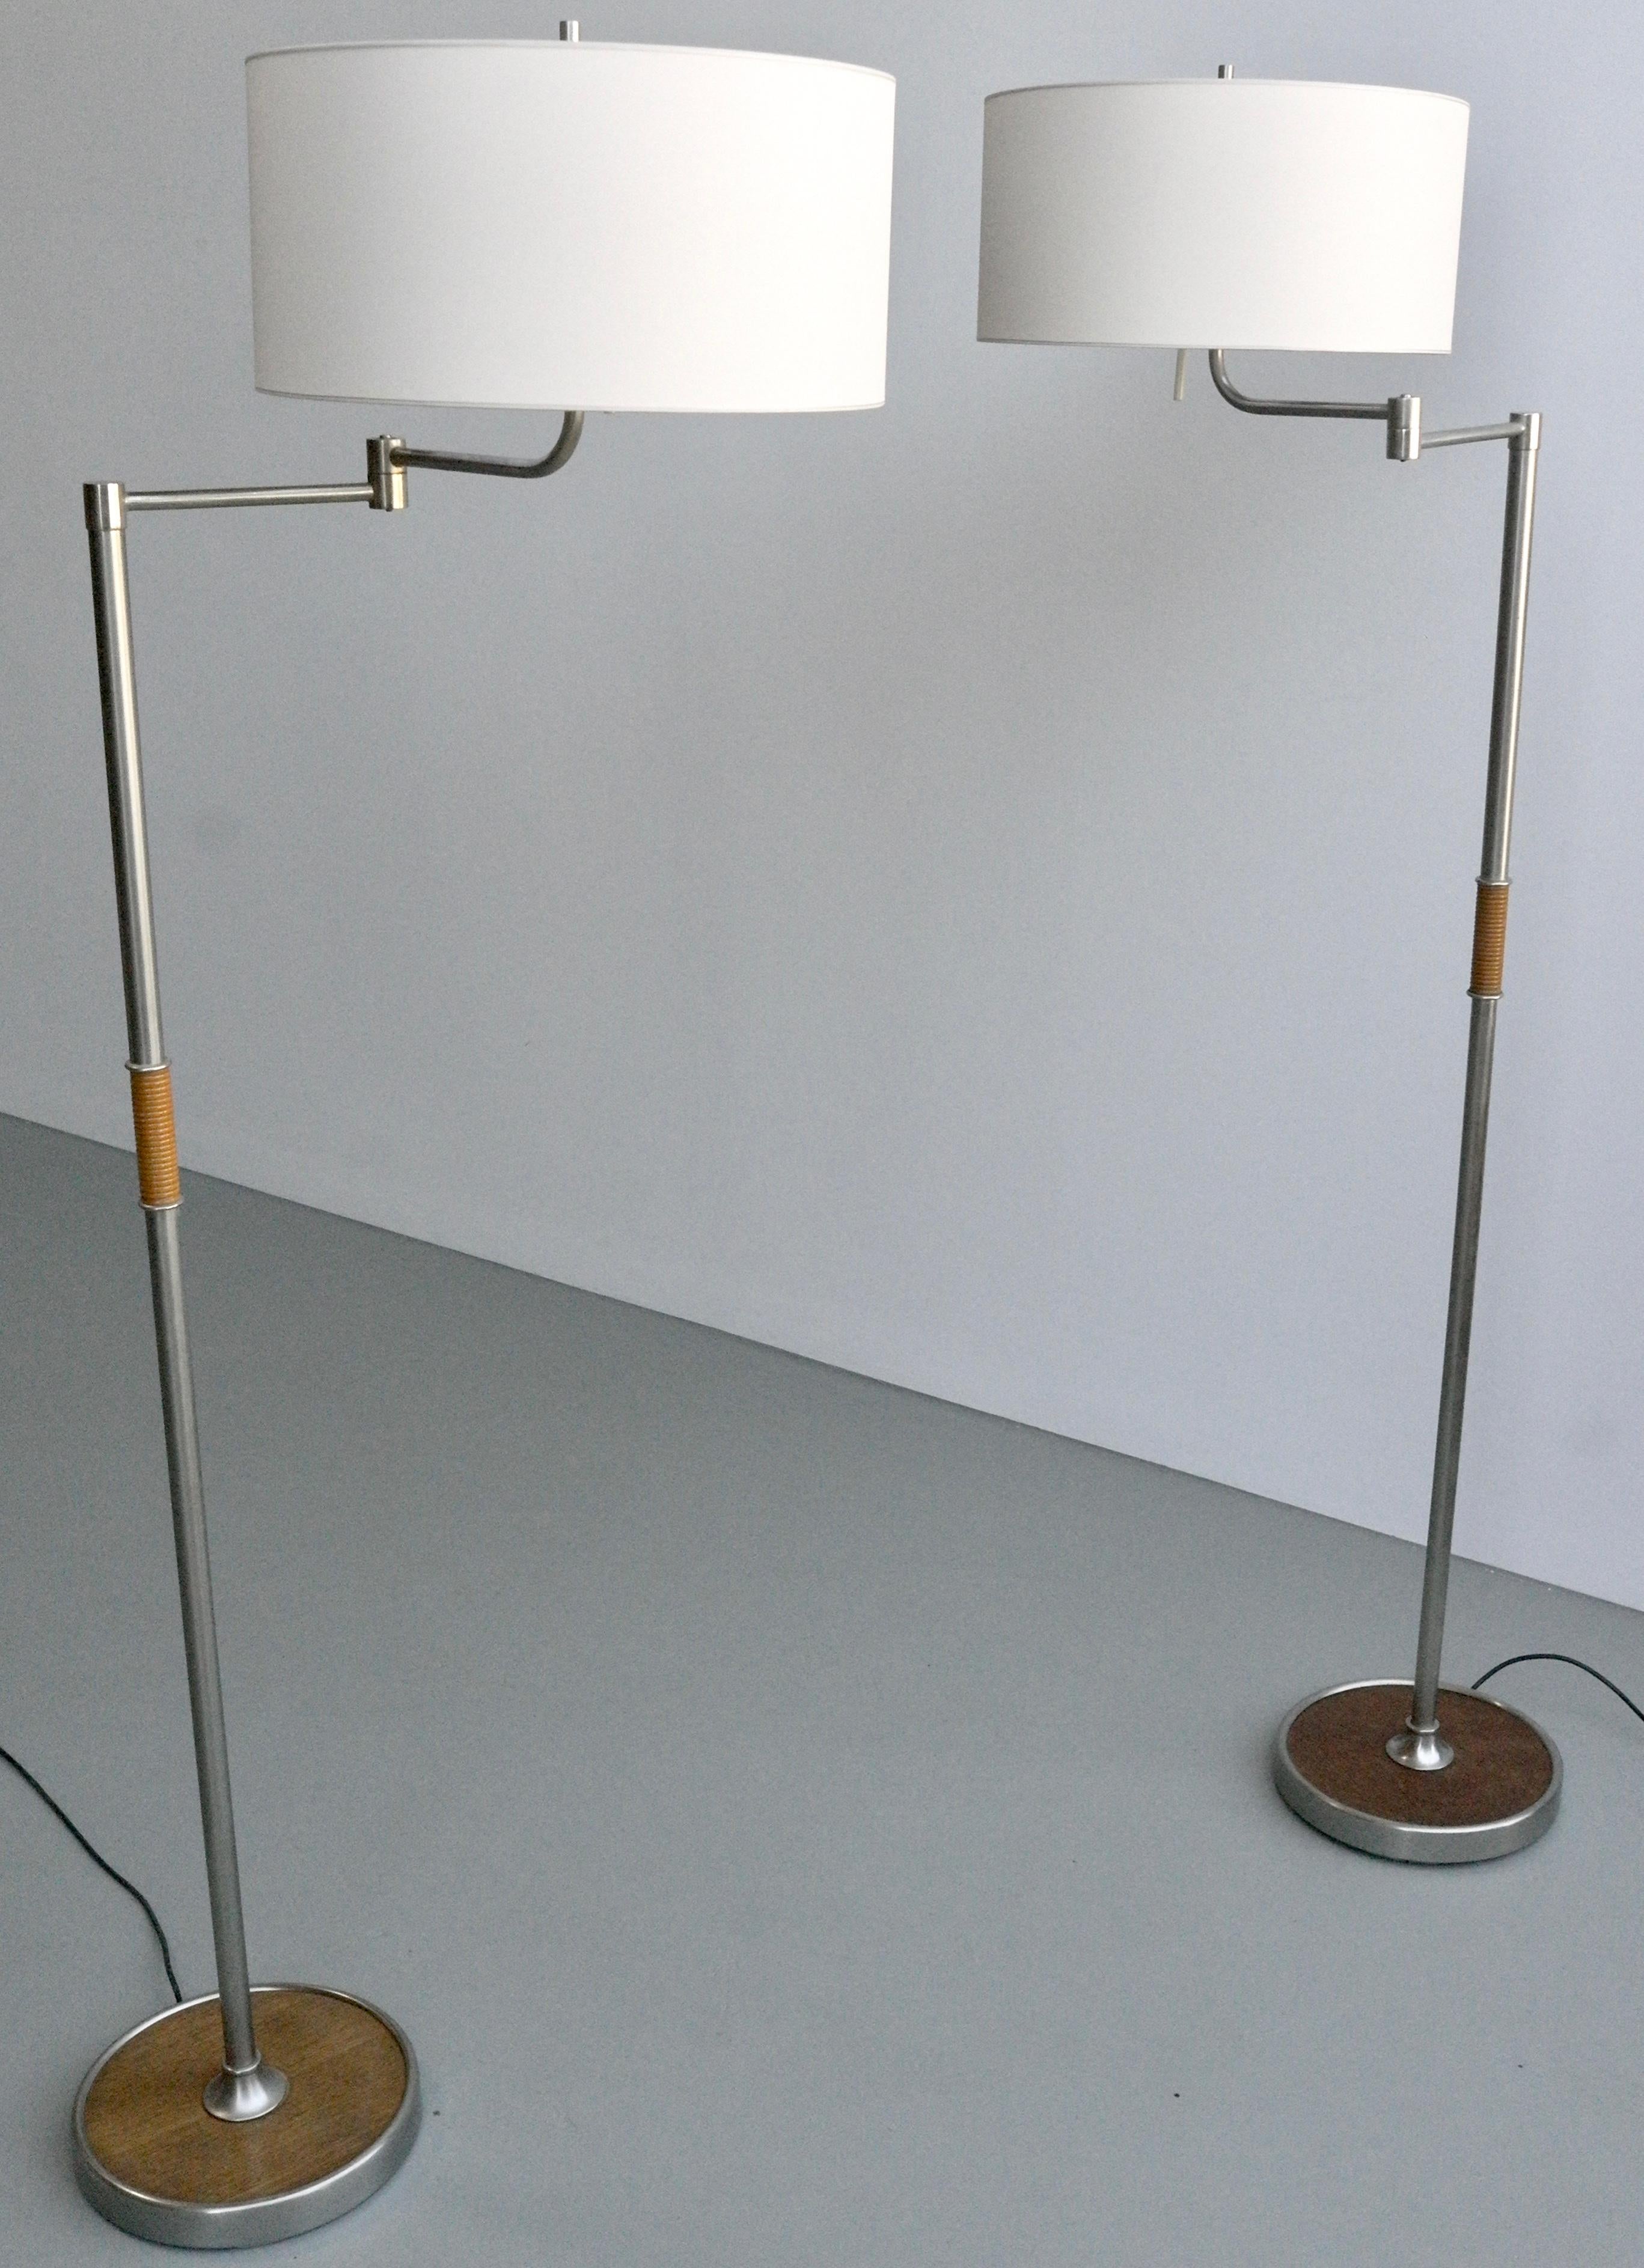 Pair of Midcentury Swing-Arm Floor Lamps in Metal with Faux Bamboo Wood Details For Sale 5